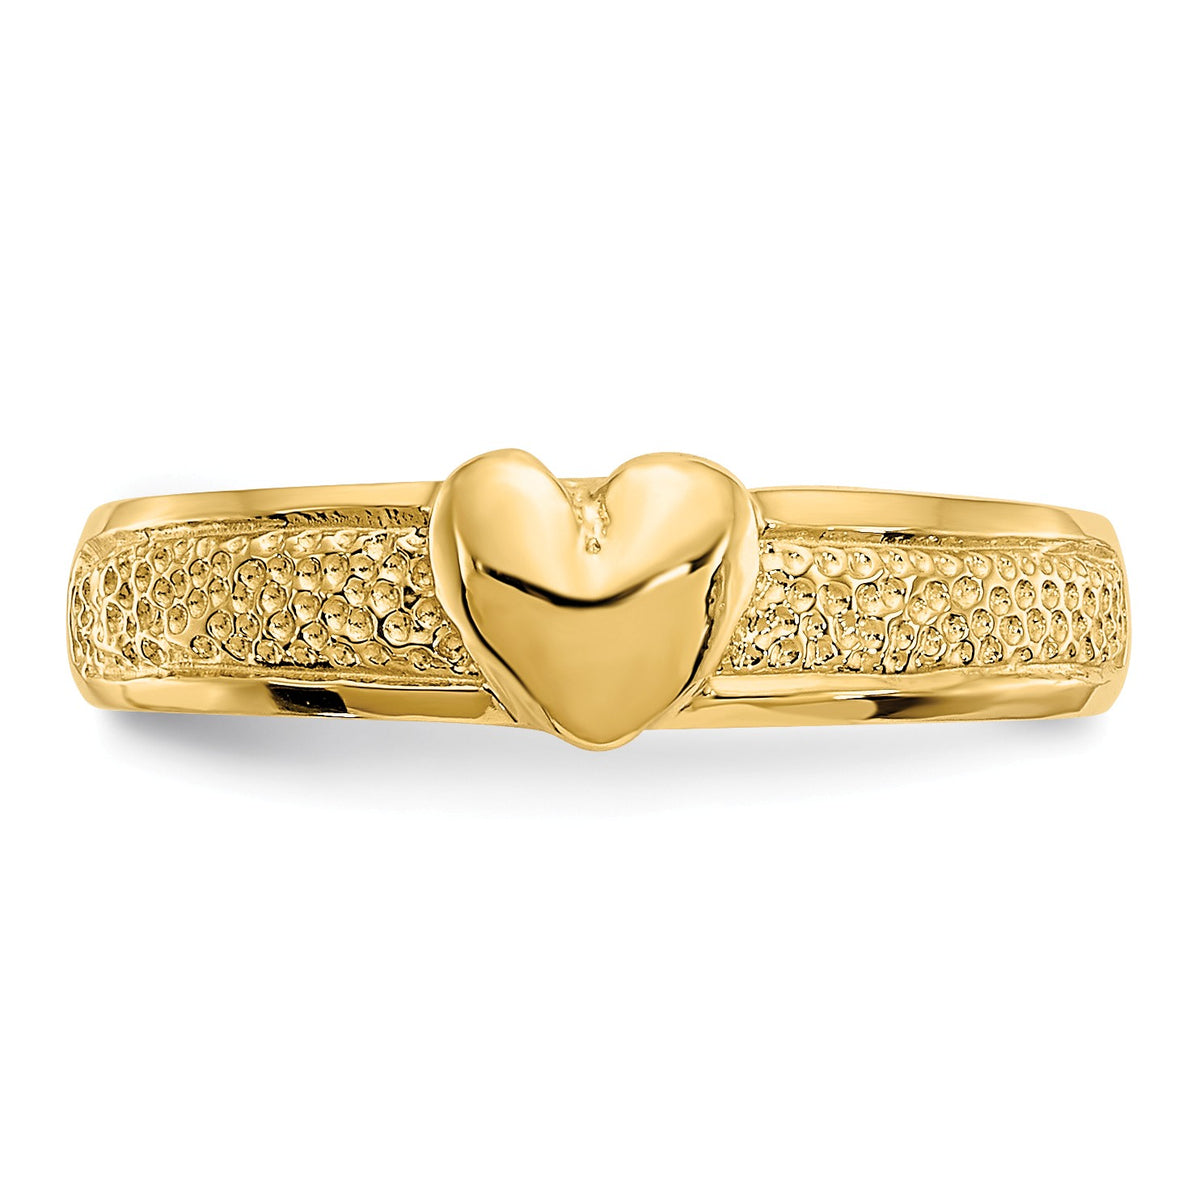 Alternate view of the Heart Toe Ring in 14 Karat Gold by The Black Bow Jewelry Co.